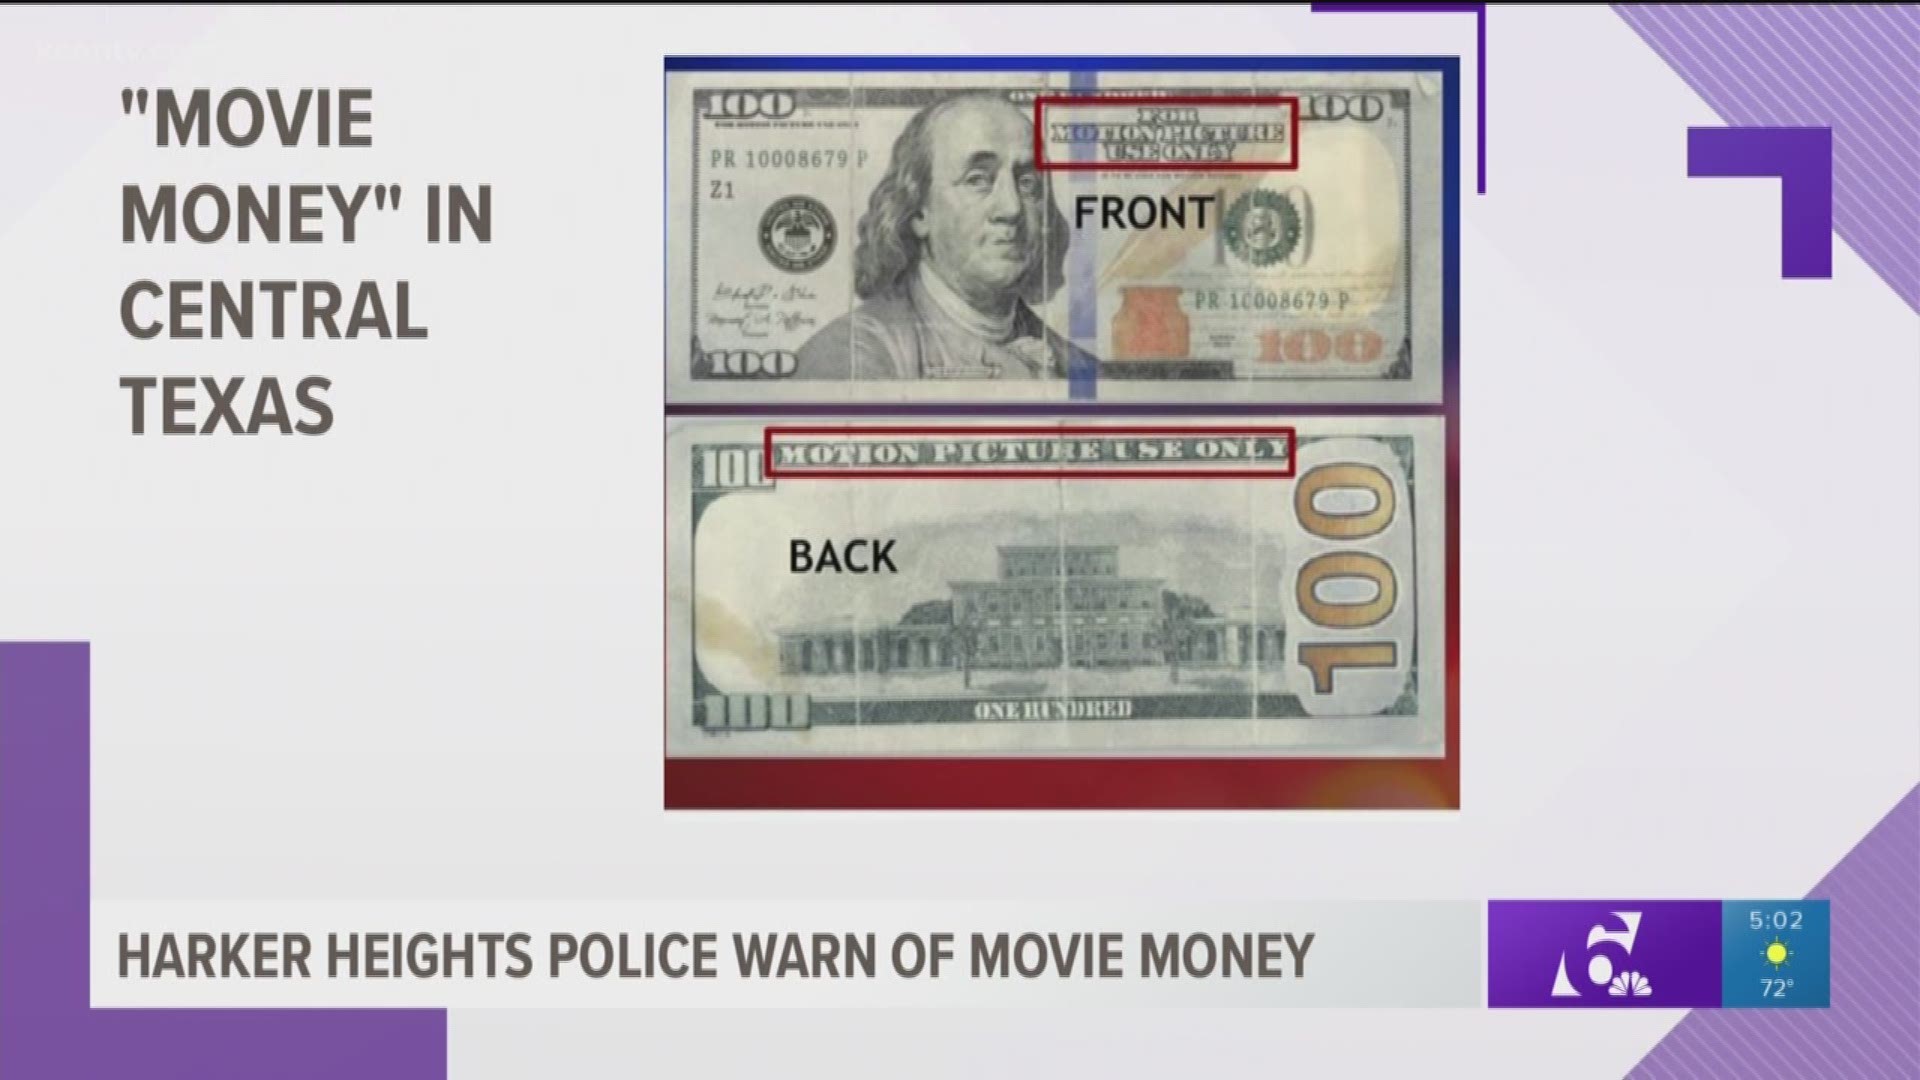 Criminals passing Hollywood-style 'movie money' in Central Texas